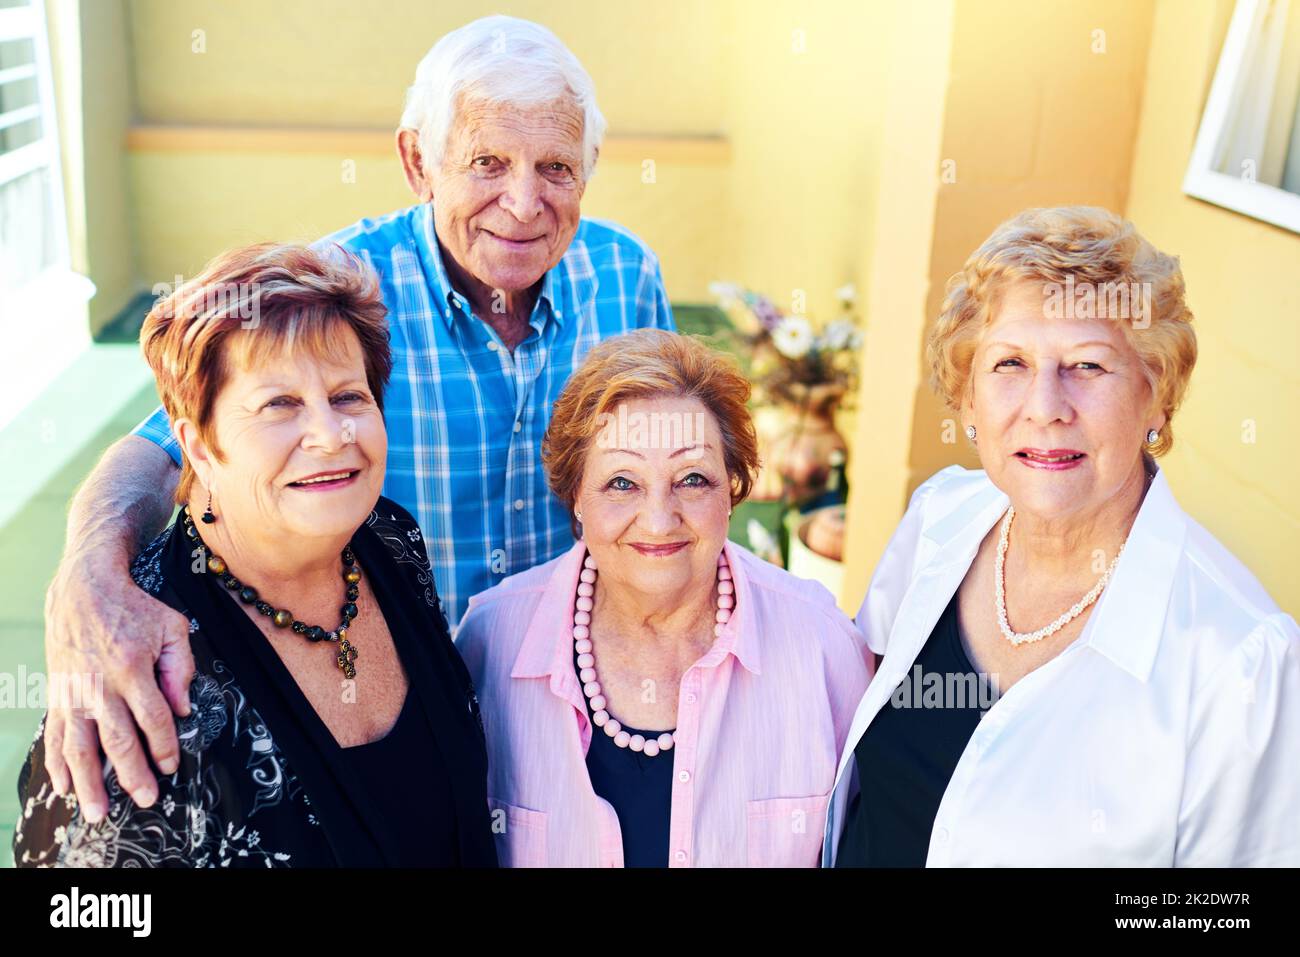 Back to being ourselves. Shot of a group cheerful elderly people smiling and posing for the camera outside of a building. Stock Photo